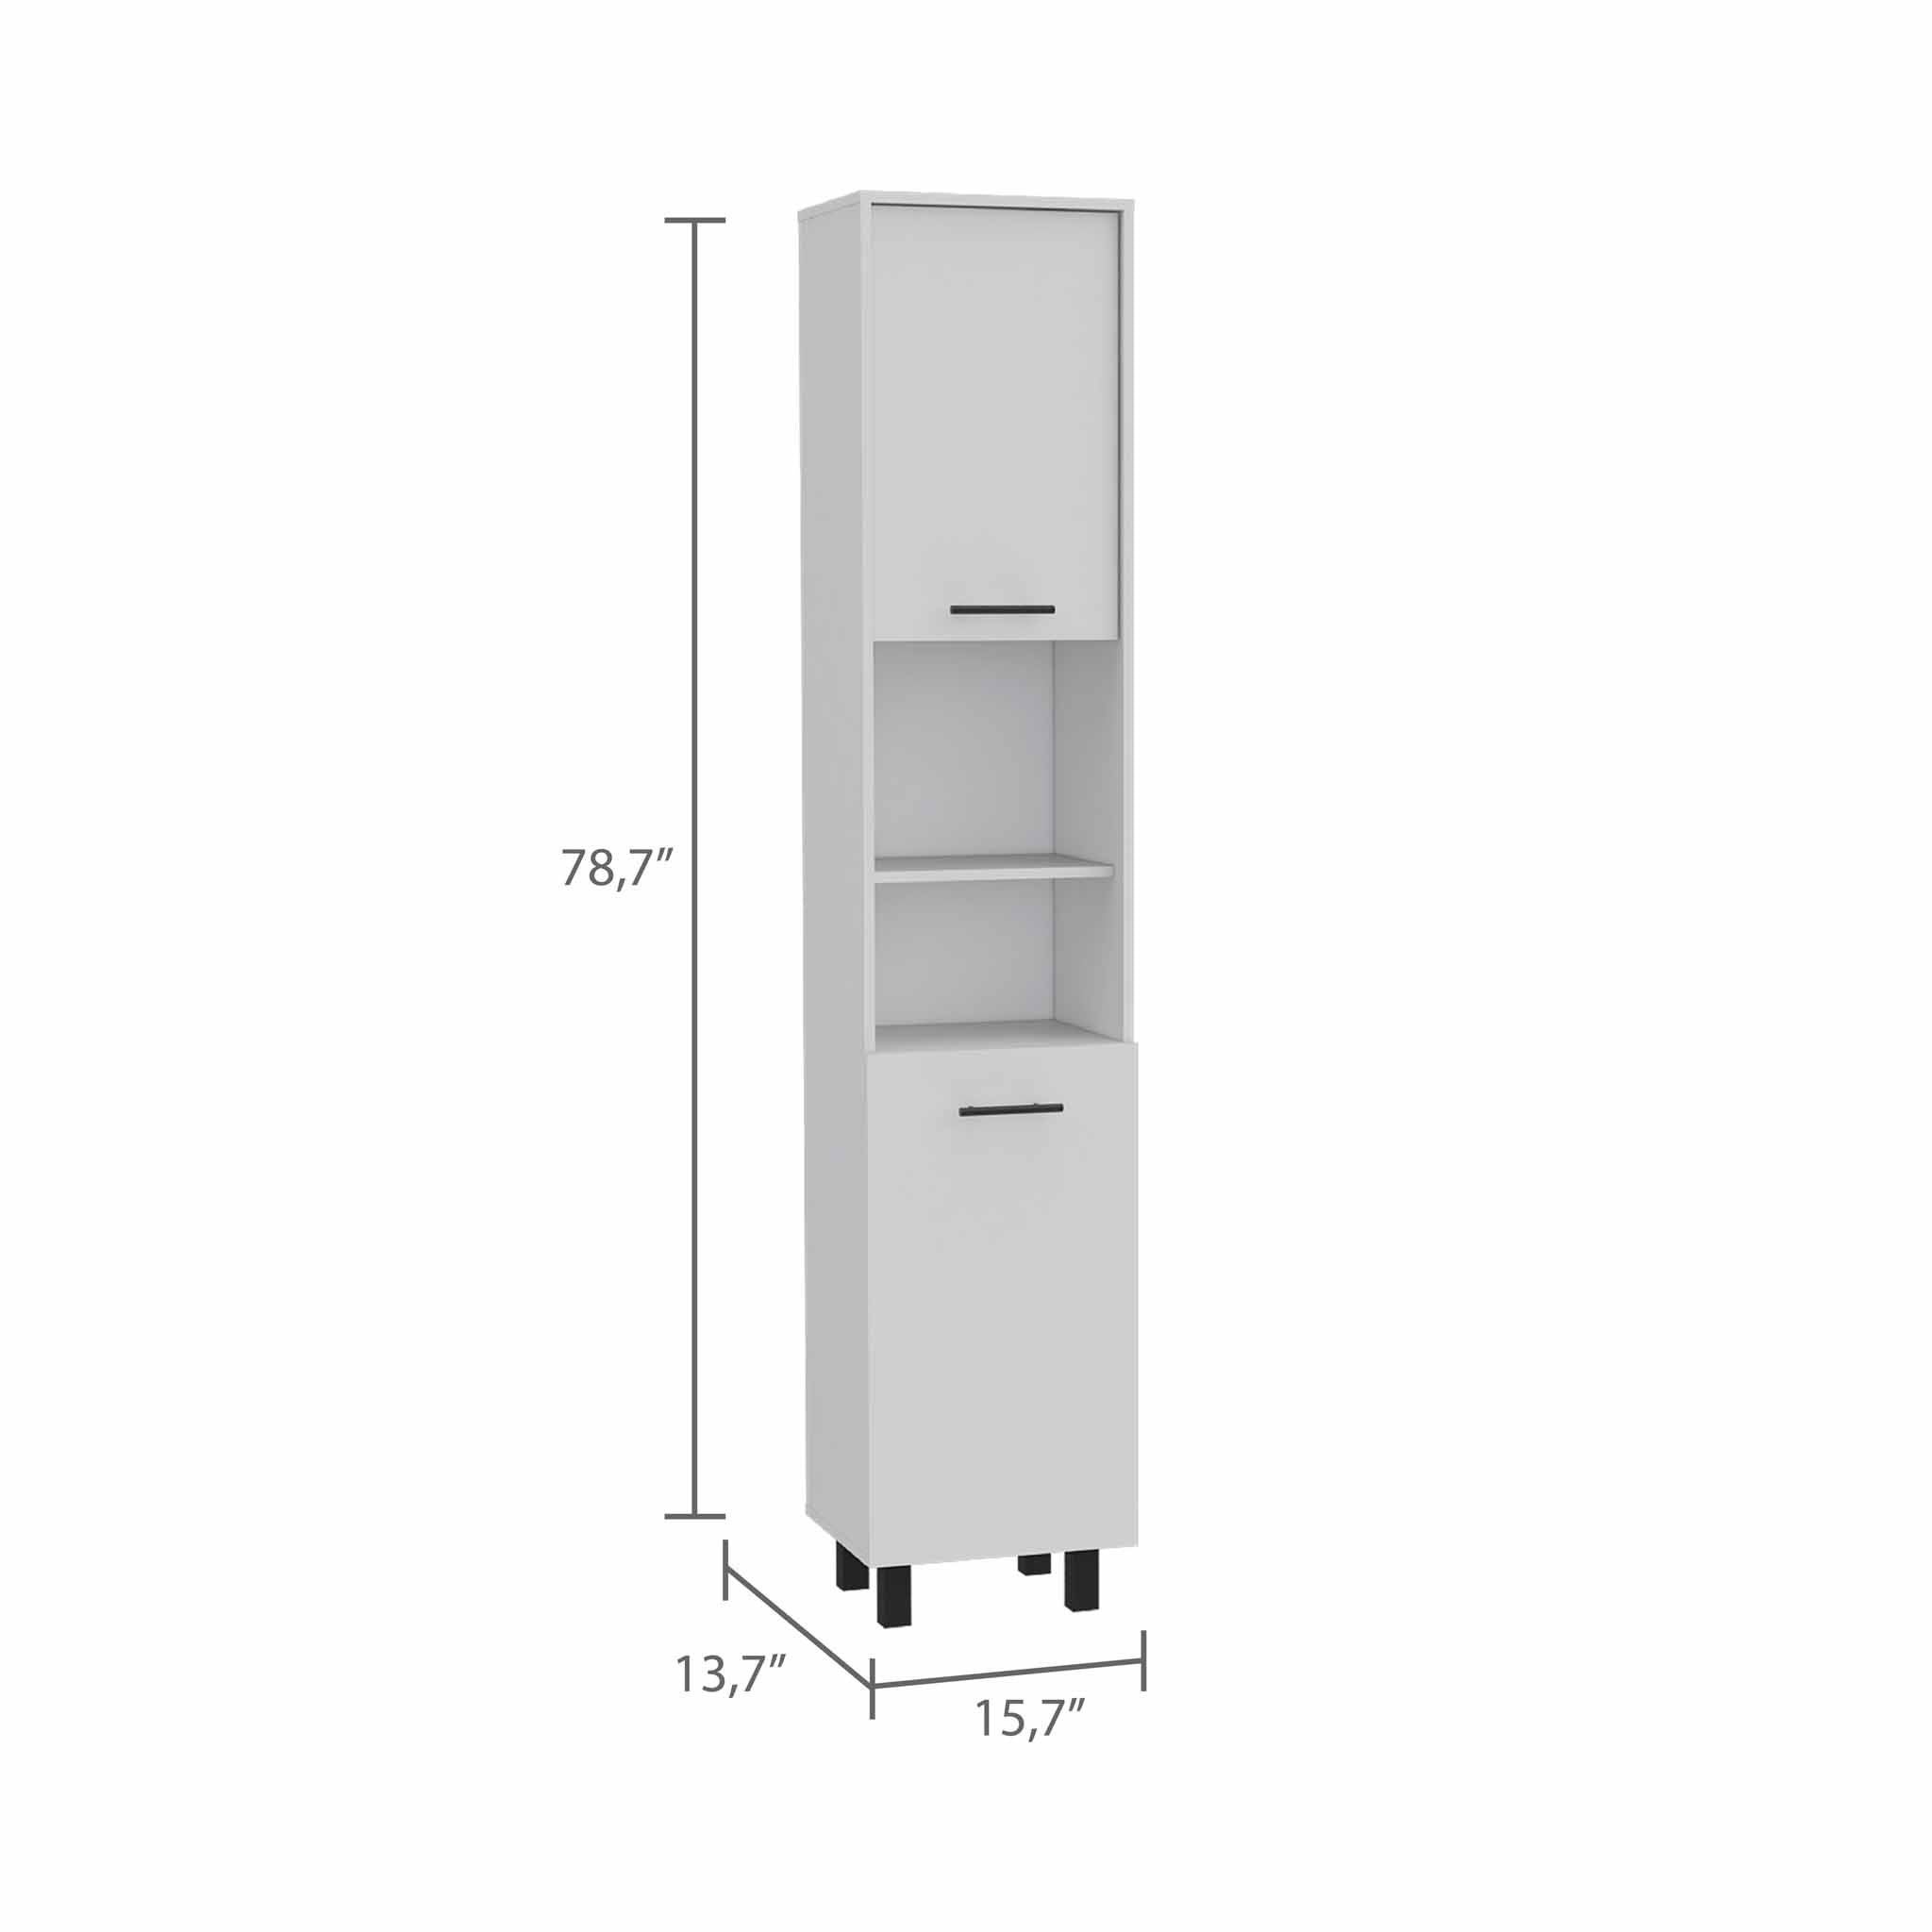 Modern Sleek And Tall Pantry Cabinet - White